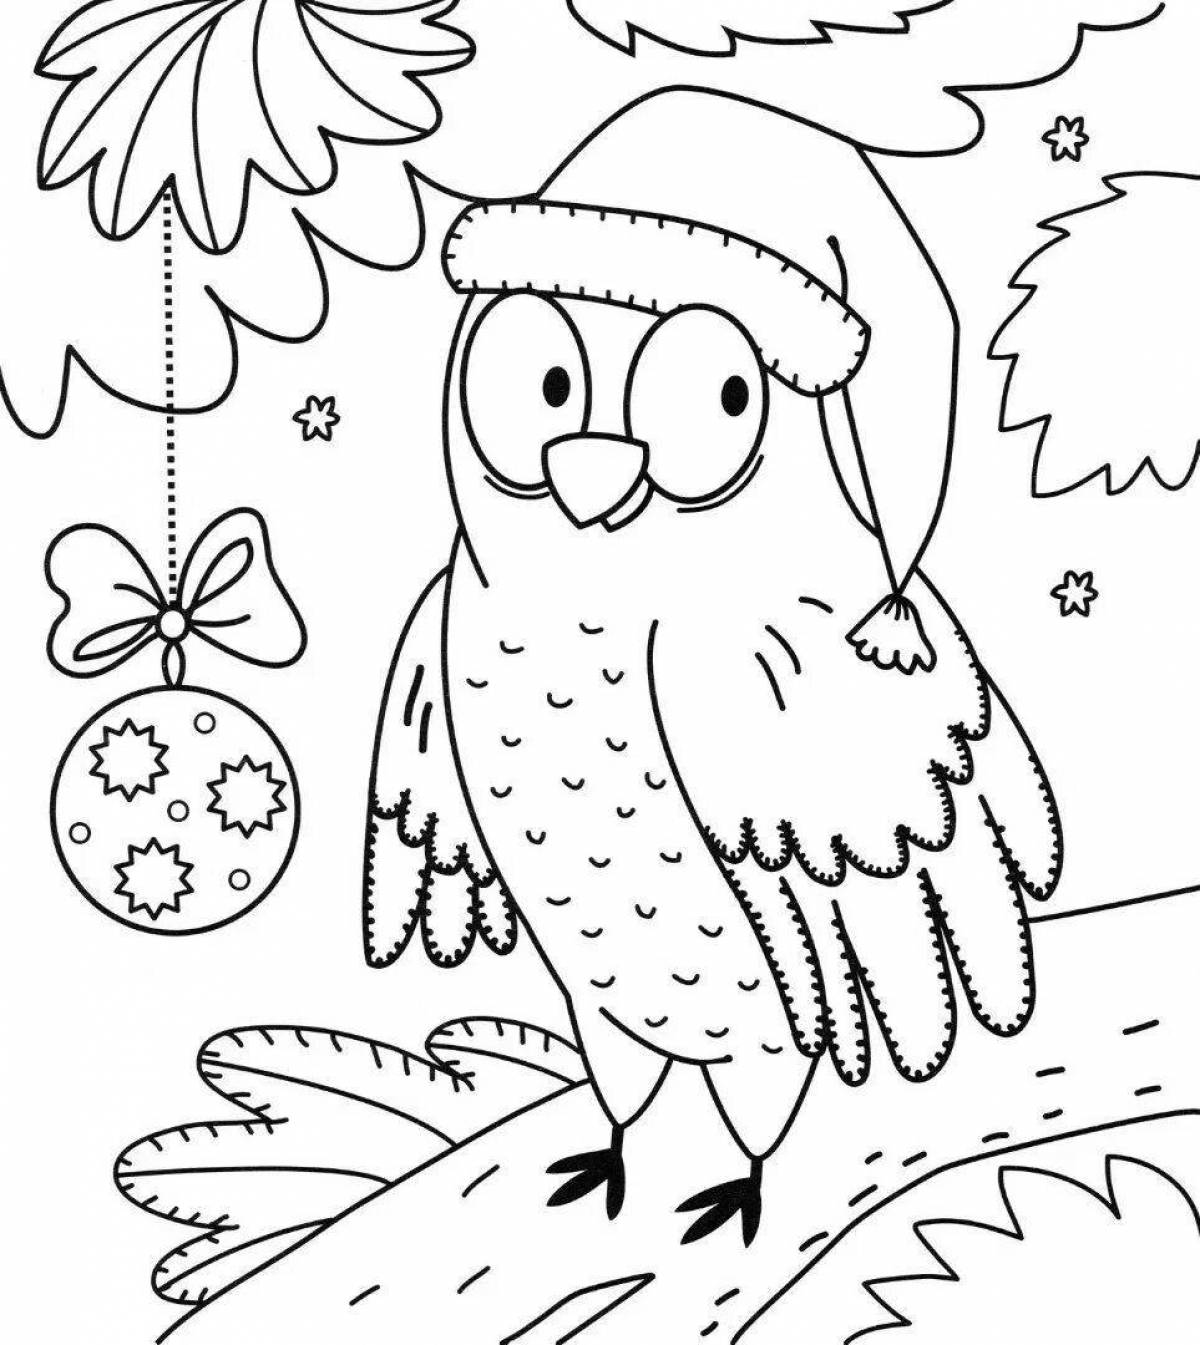 Gorgeous winter birds coloring book for 6-7 year olds